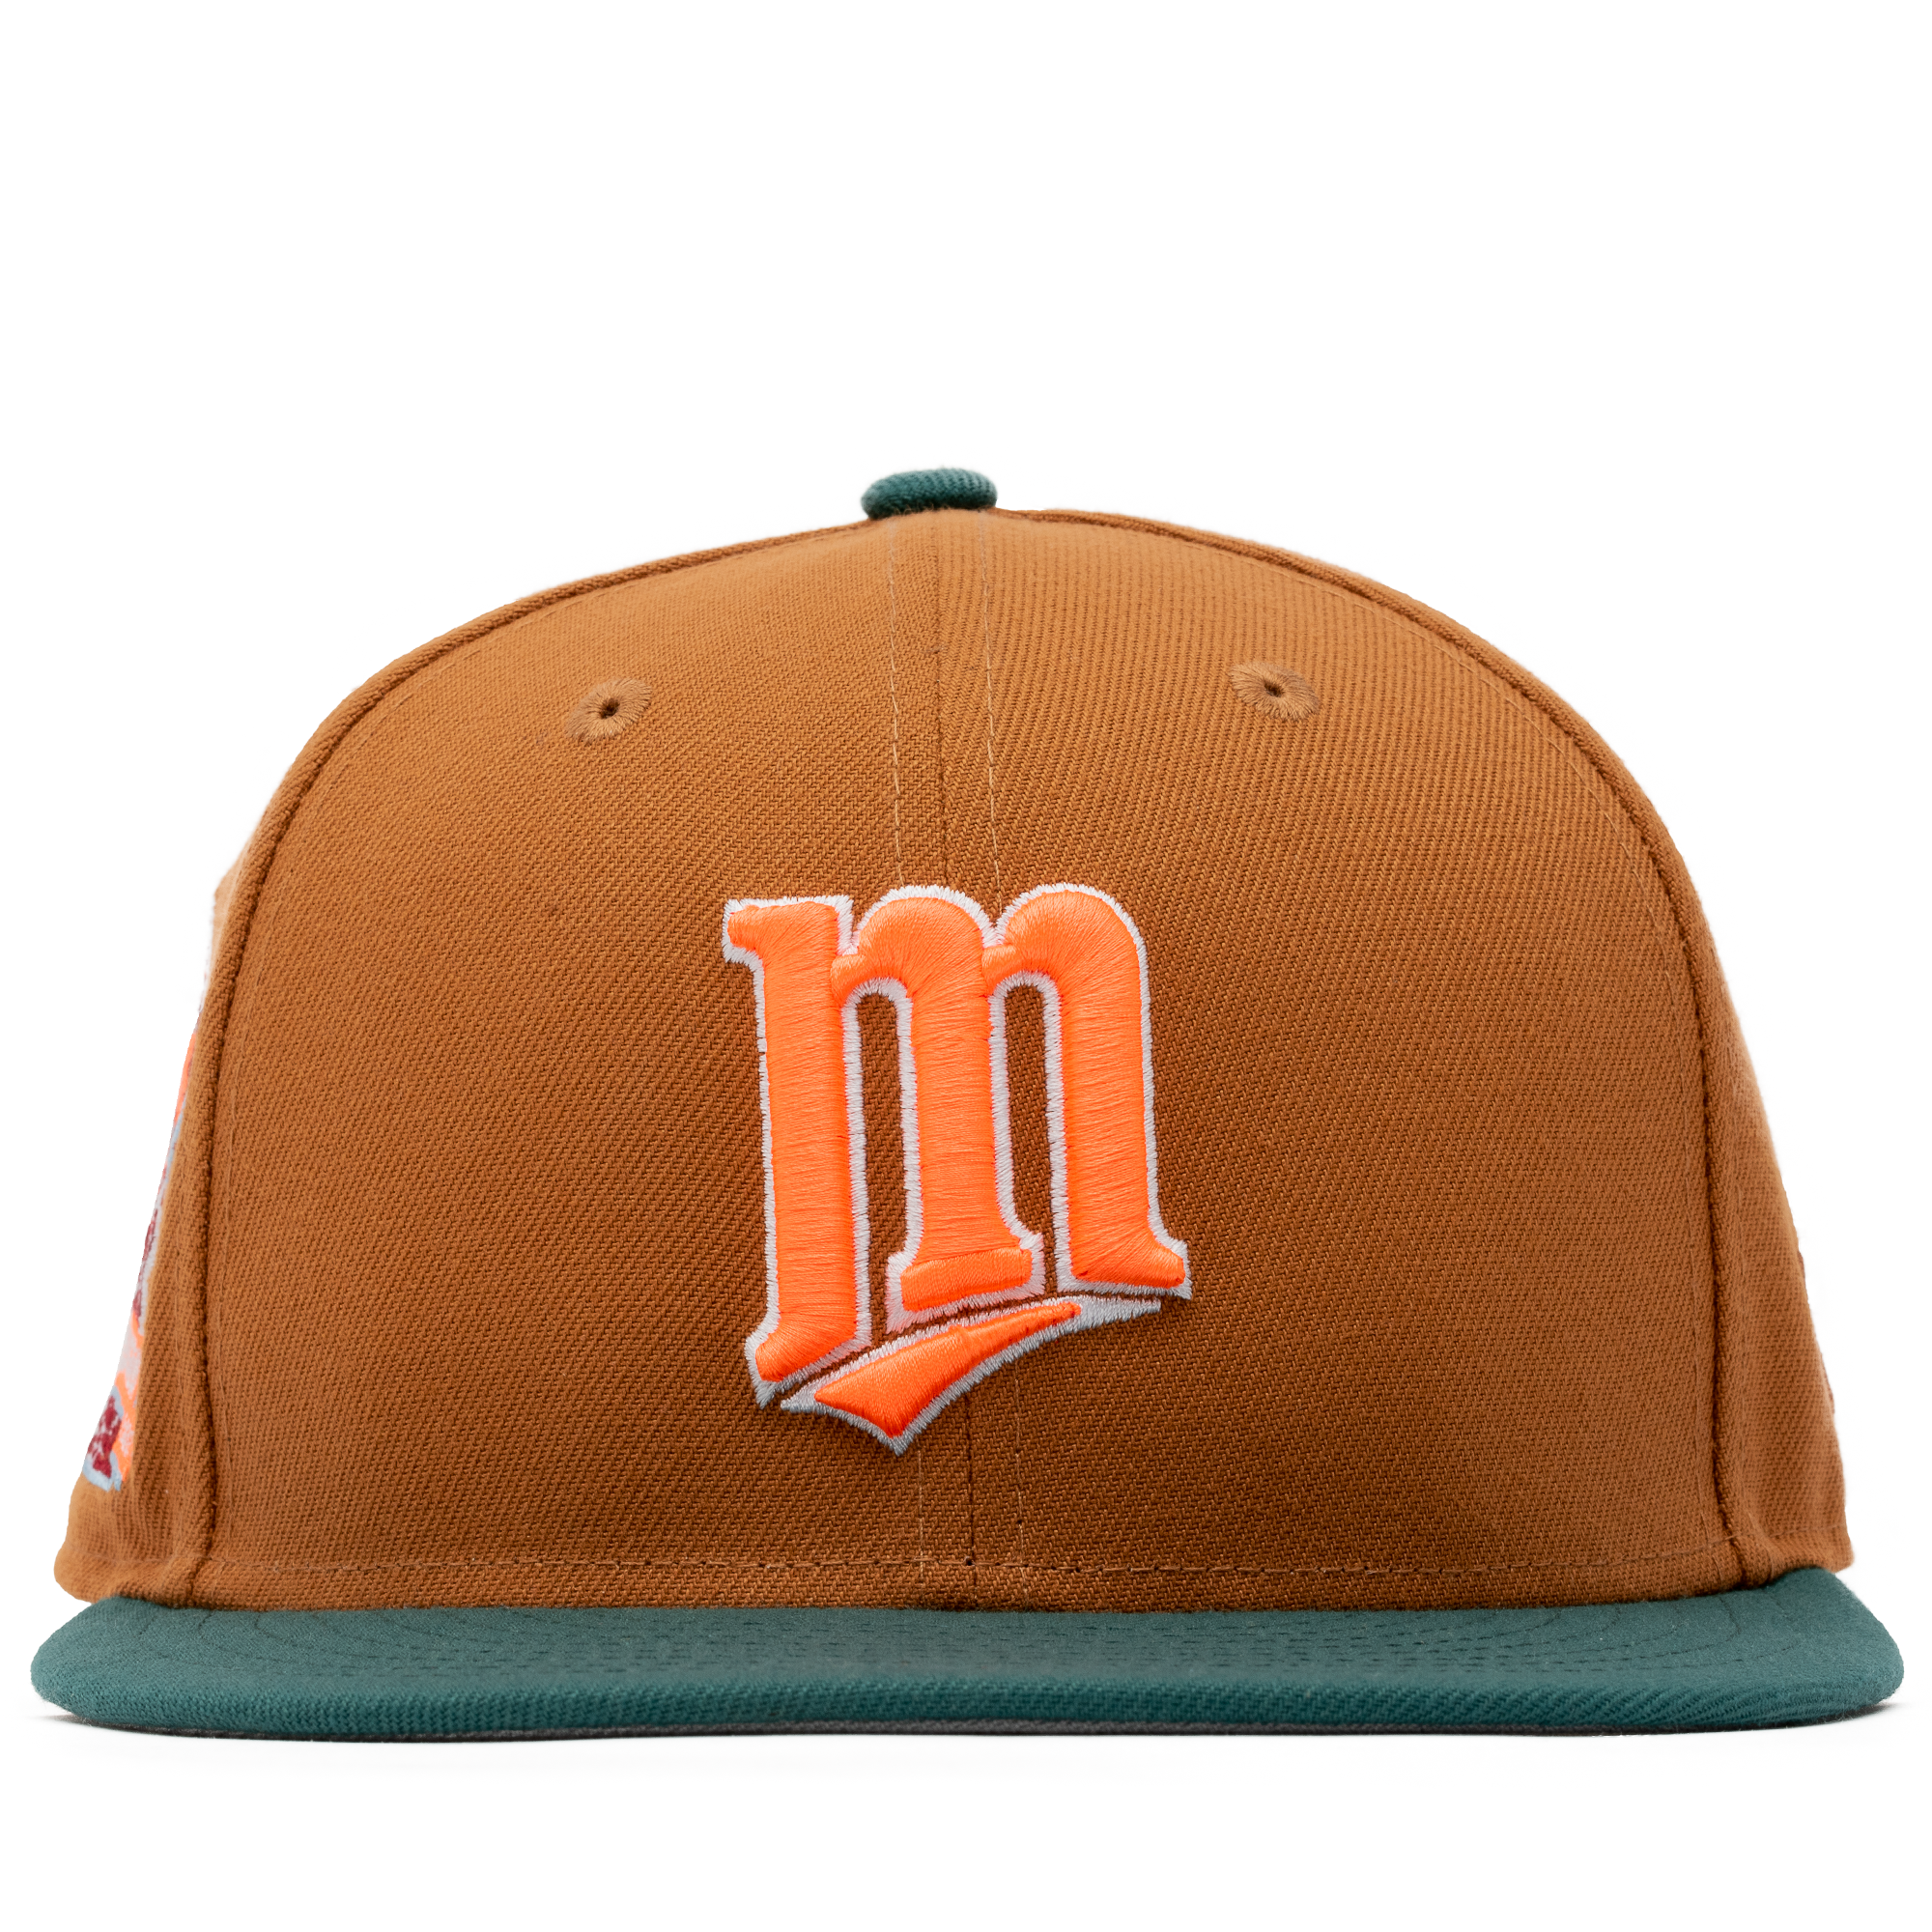 New Era x Politics Milwaukee Brewers 59FIFTY Fitted Hat - Mint/Green, Size 7 1/8 by Sneaker Politics